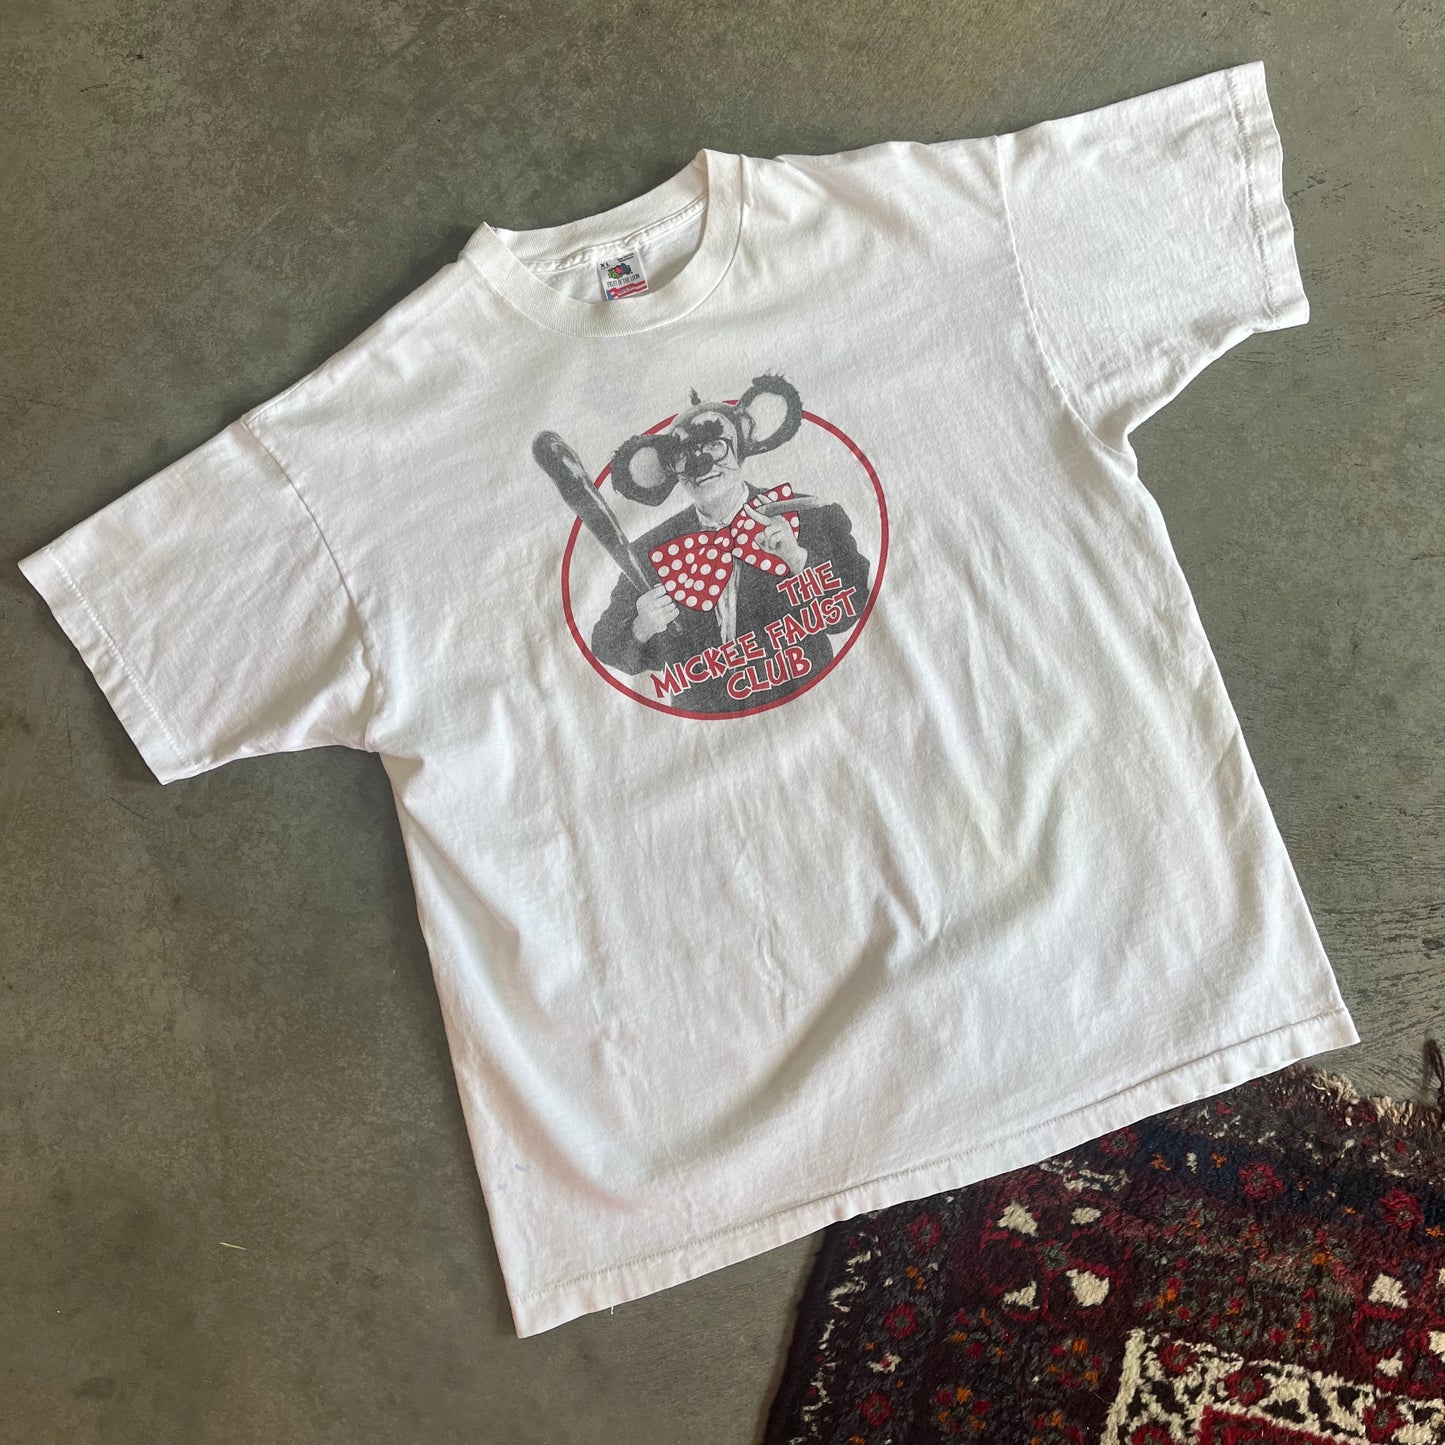 Tallahassee Mickee Faust Club Shirt - XL (As-Is)